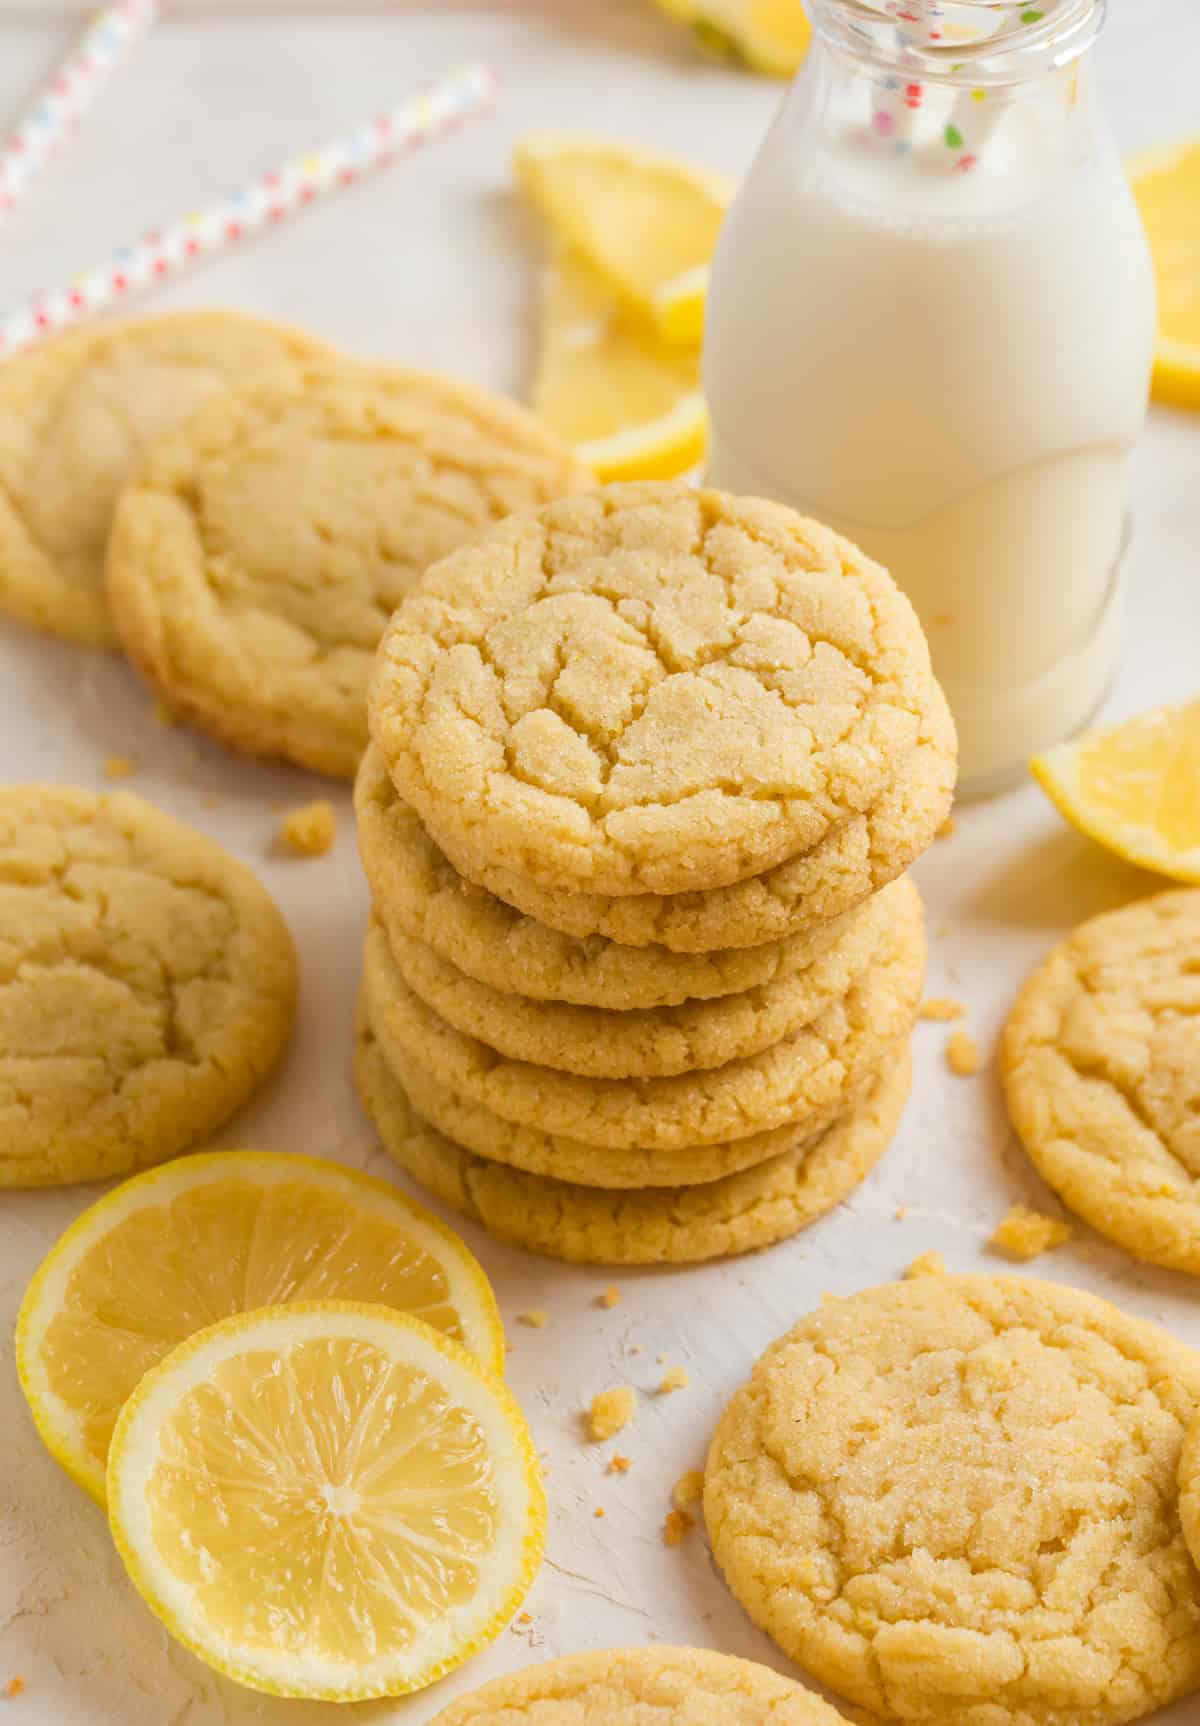 Lemon sugar cookies stacked on top of each other with glass of milk behind and other cookies and lemons surrounding.